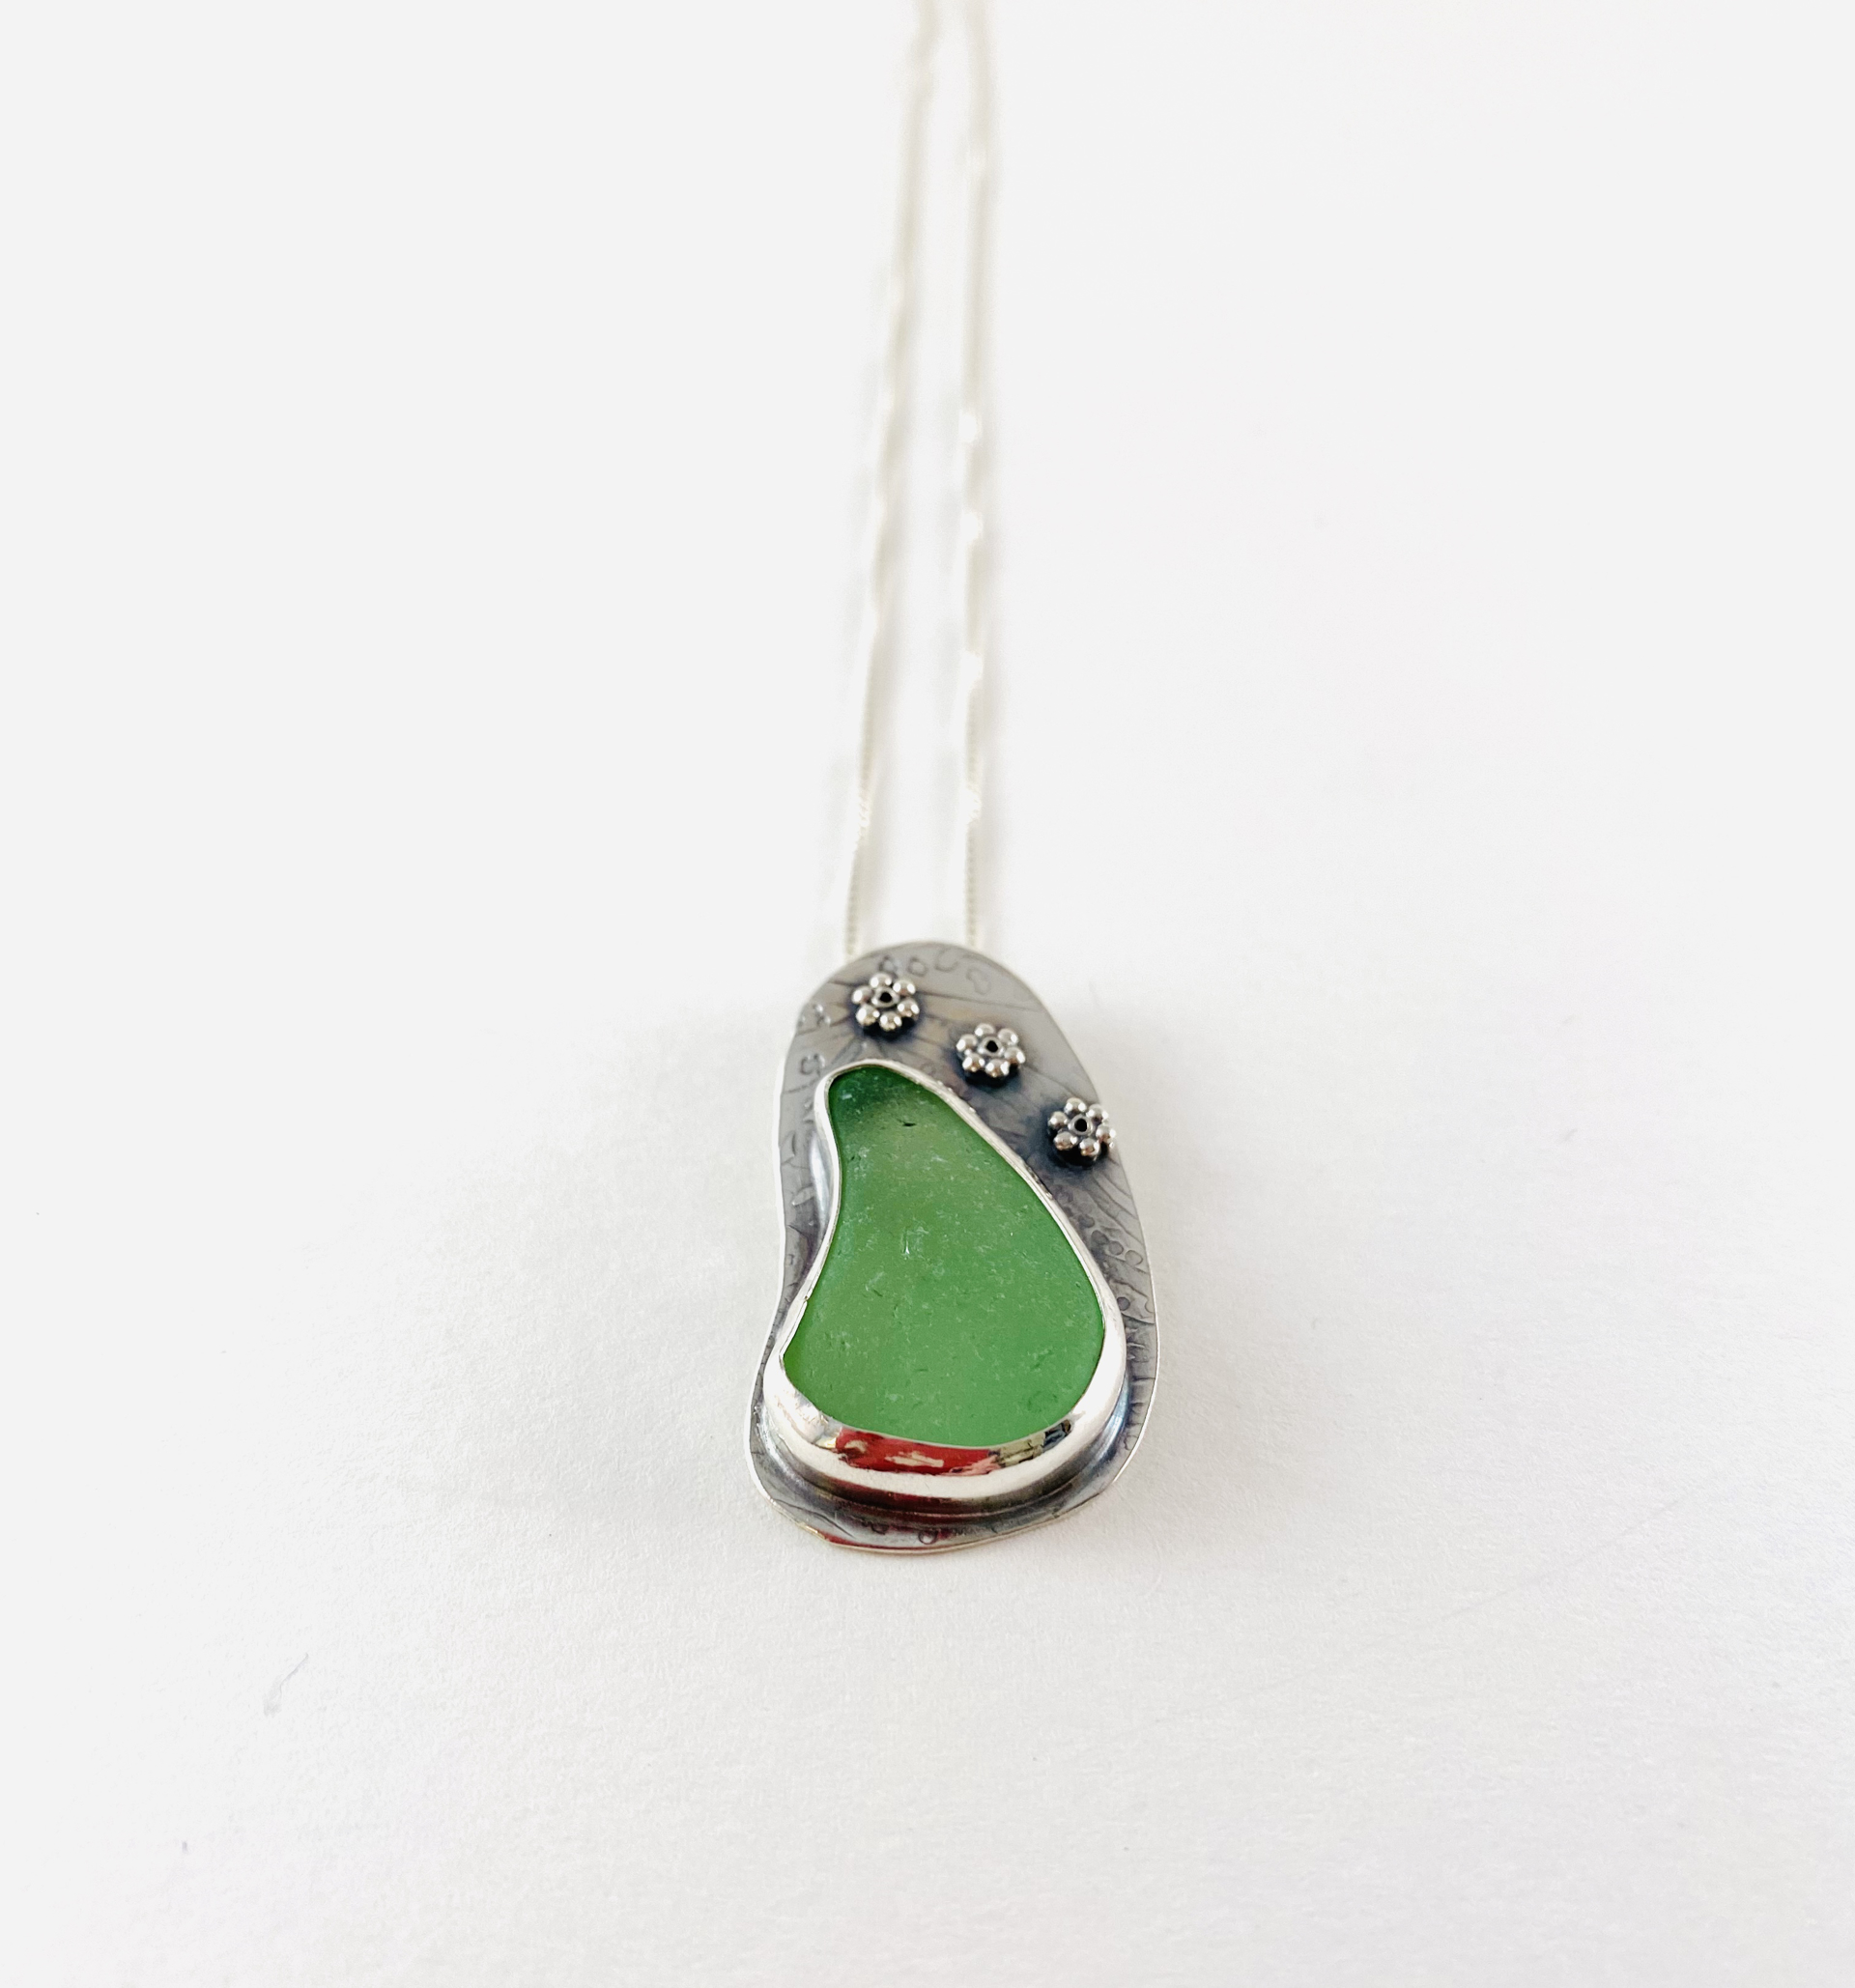 Silver and Sea Glass Pendant on Silver Box Chain by Anne Bivens